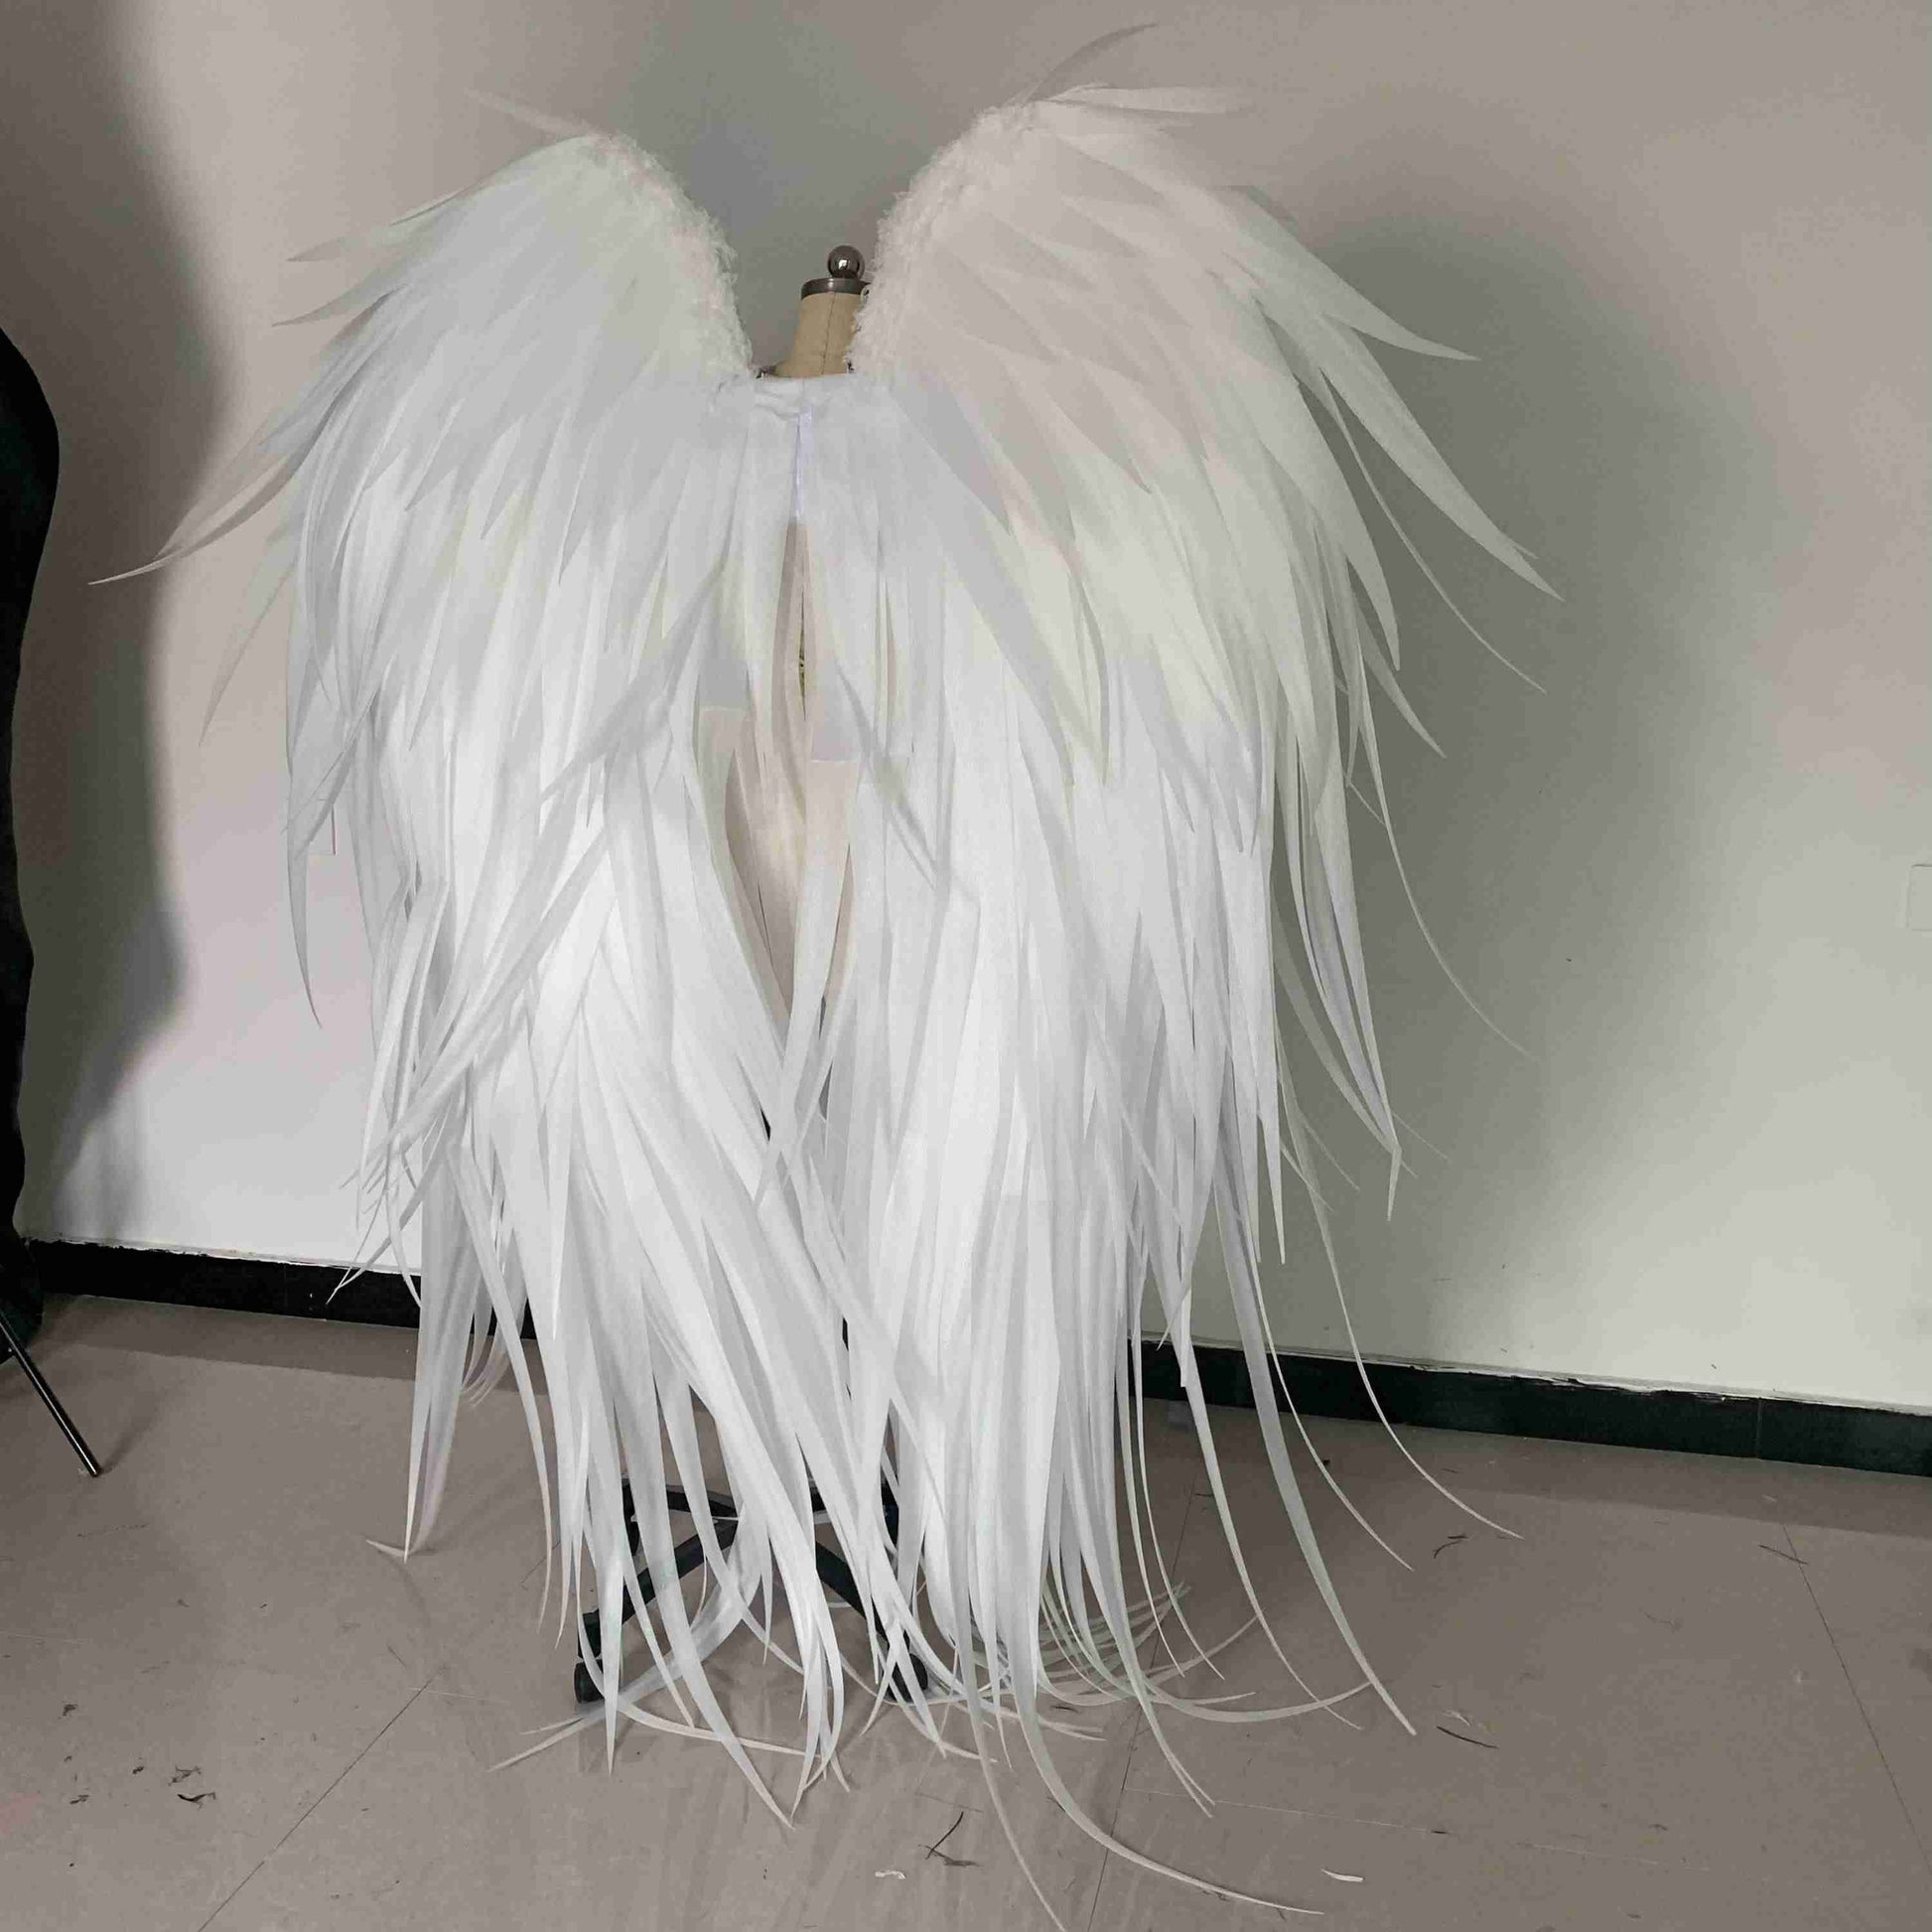 Our white angel wings from the back. Made from pearl cotton foam and some goose feathers. Wings for angel costume. Suitable for photoshoots.